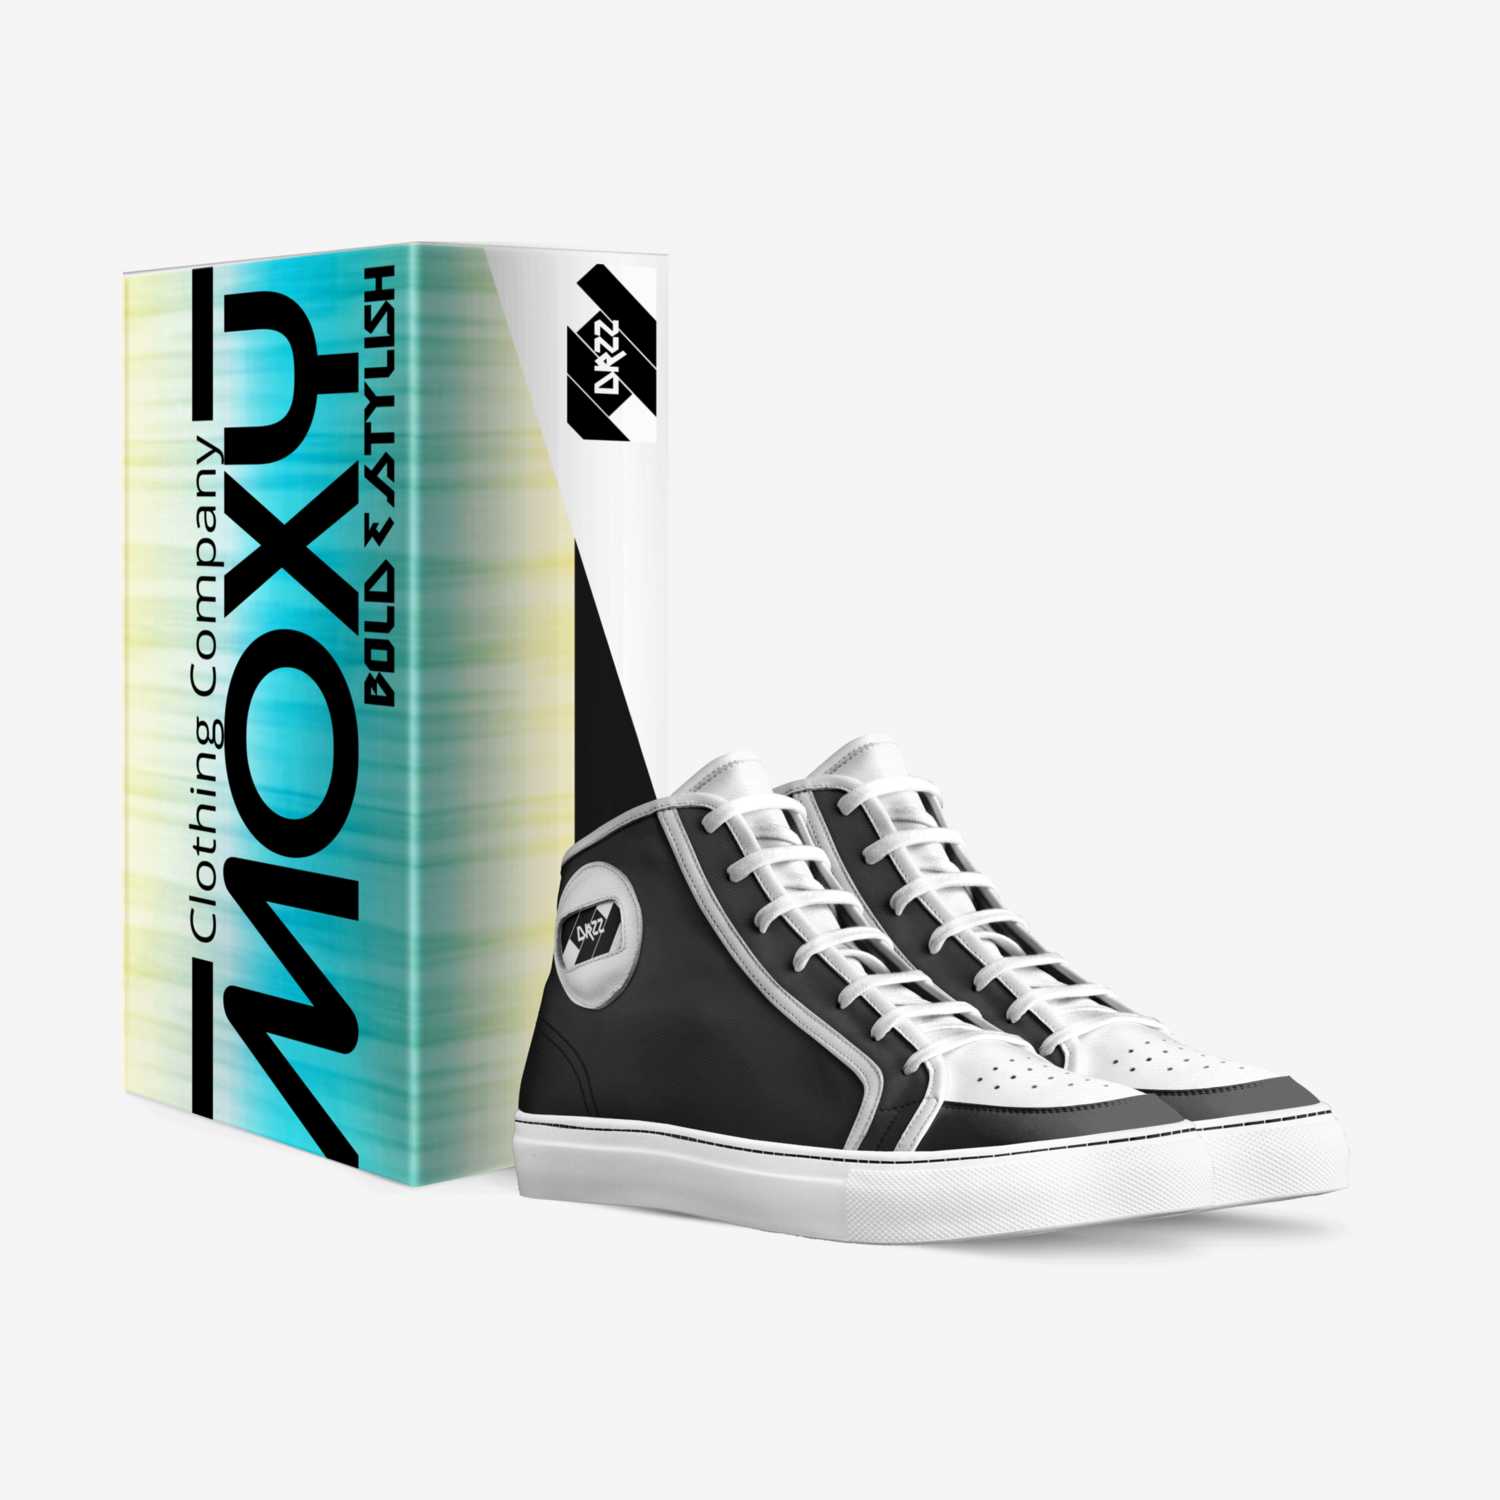 DR22 custom made in Italy shoes by Moxy Clothing Co. | Box view